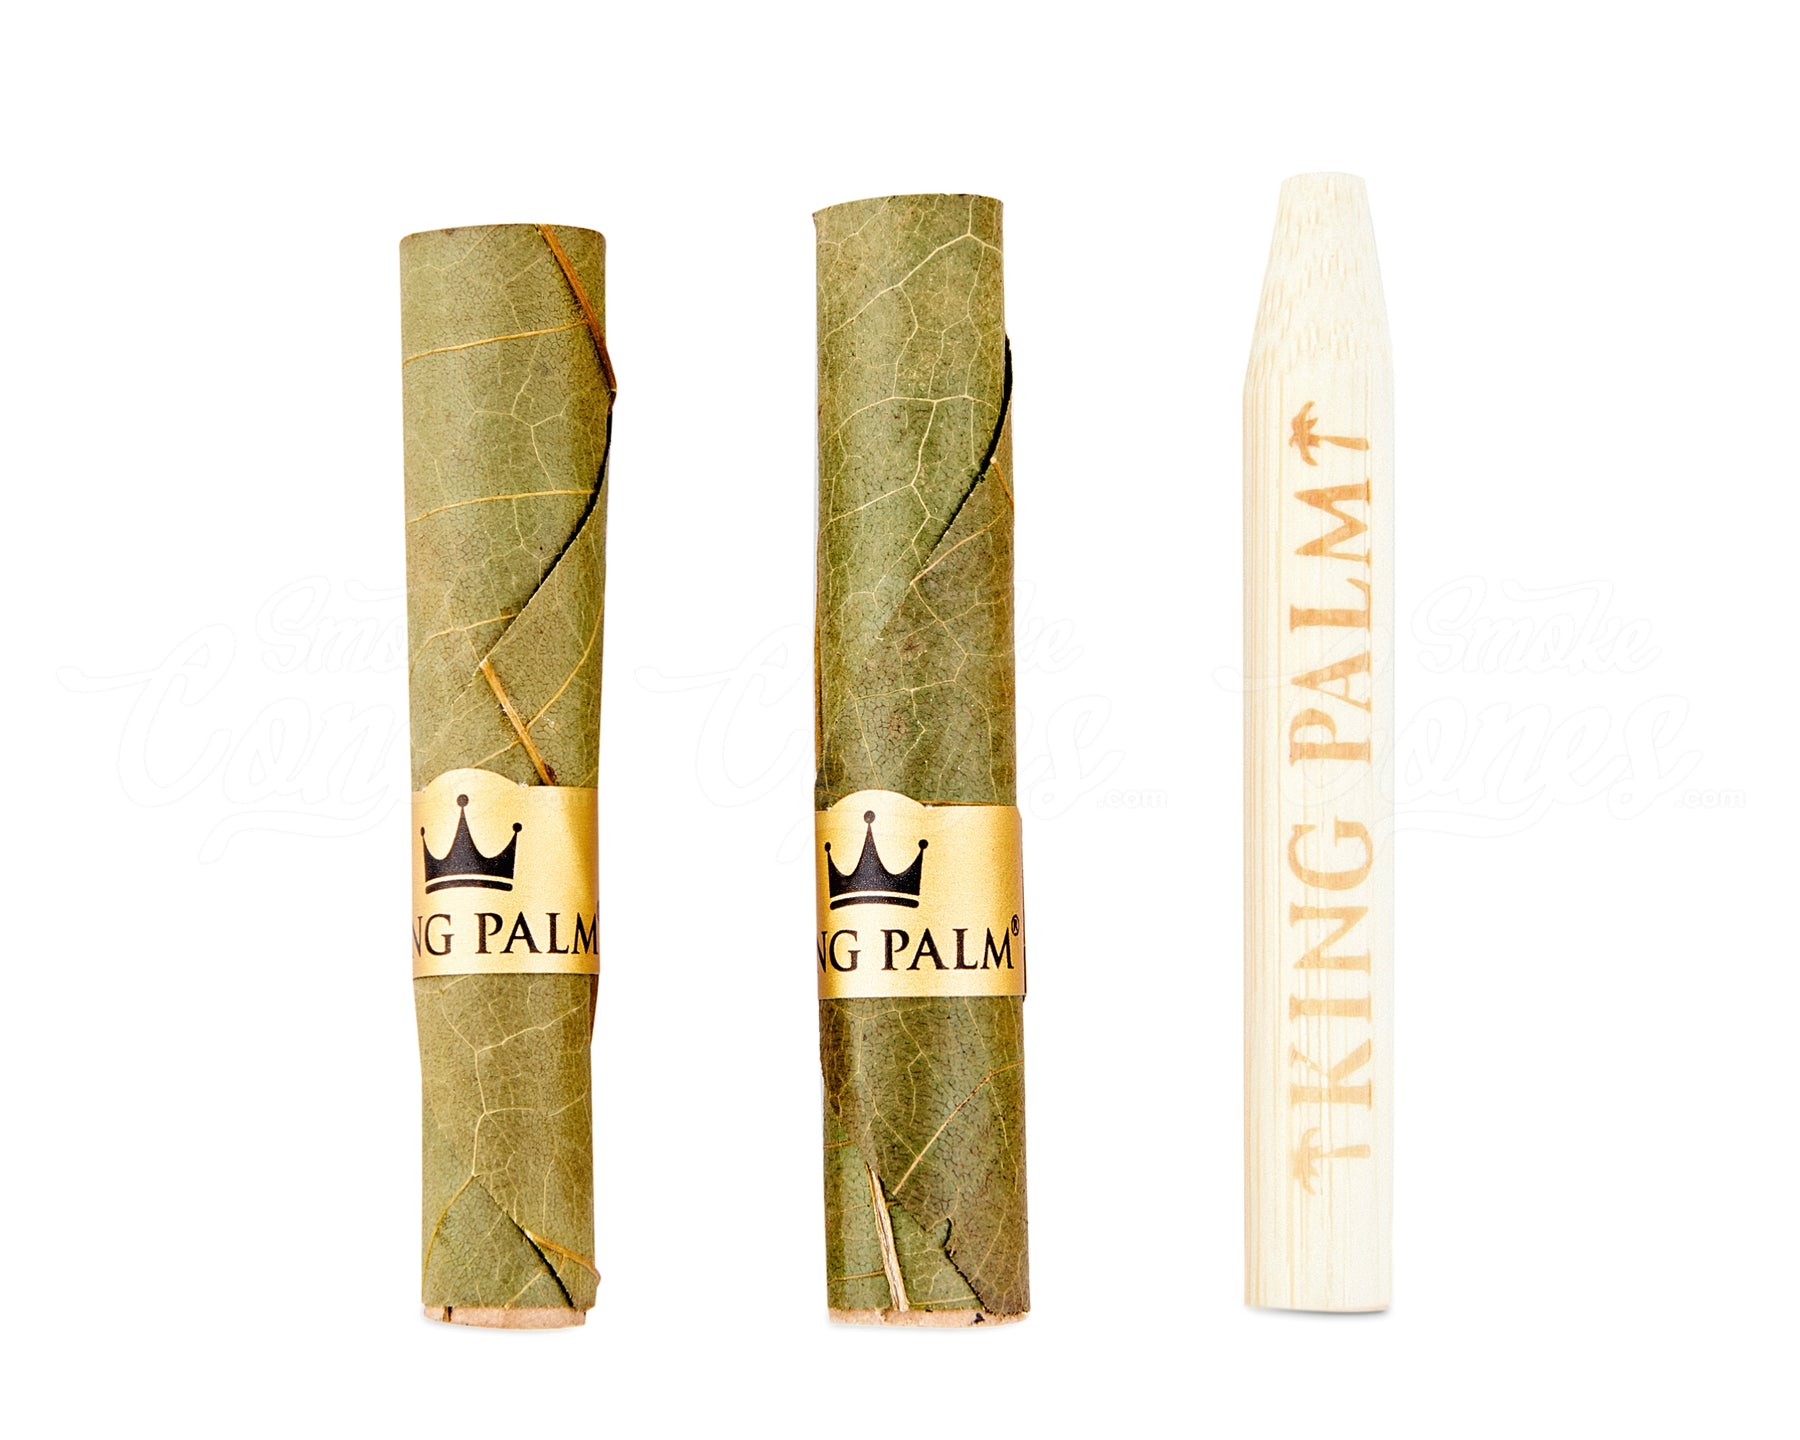 King Palm Perfect Pear Natural Rollie Leaf Blunt Wraps 20/Box